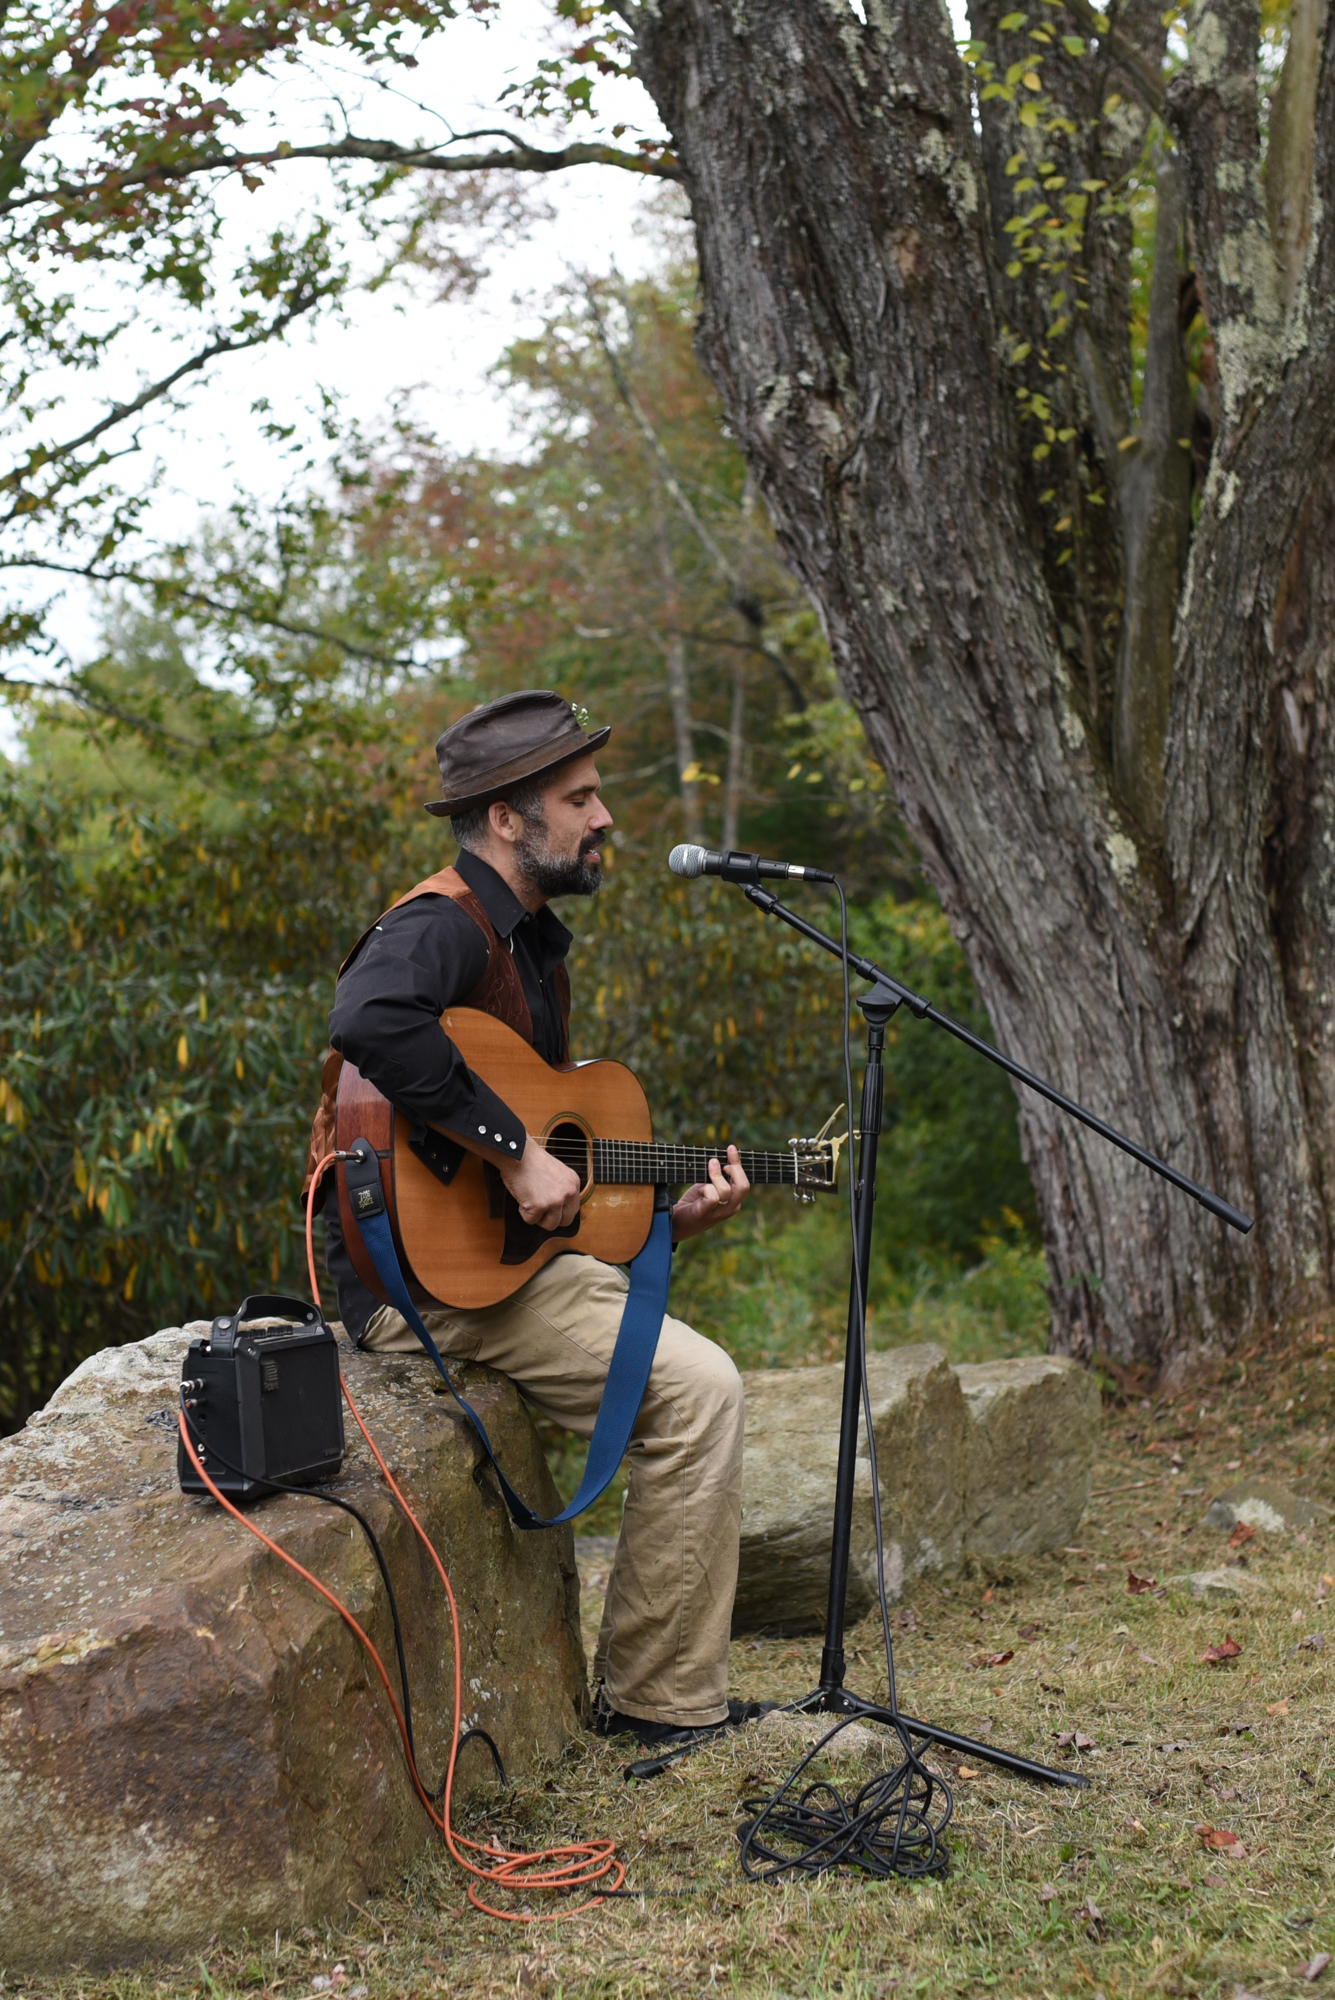  Mountain Wedding, Outdoors, Rustic, West Virginia, Maryland Wedding Photographer, DIY, Casual, friend playing guitar and singing at reception 